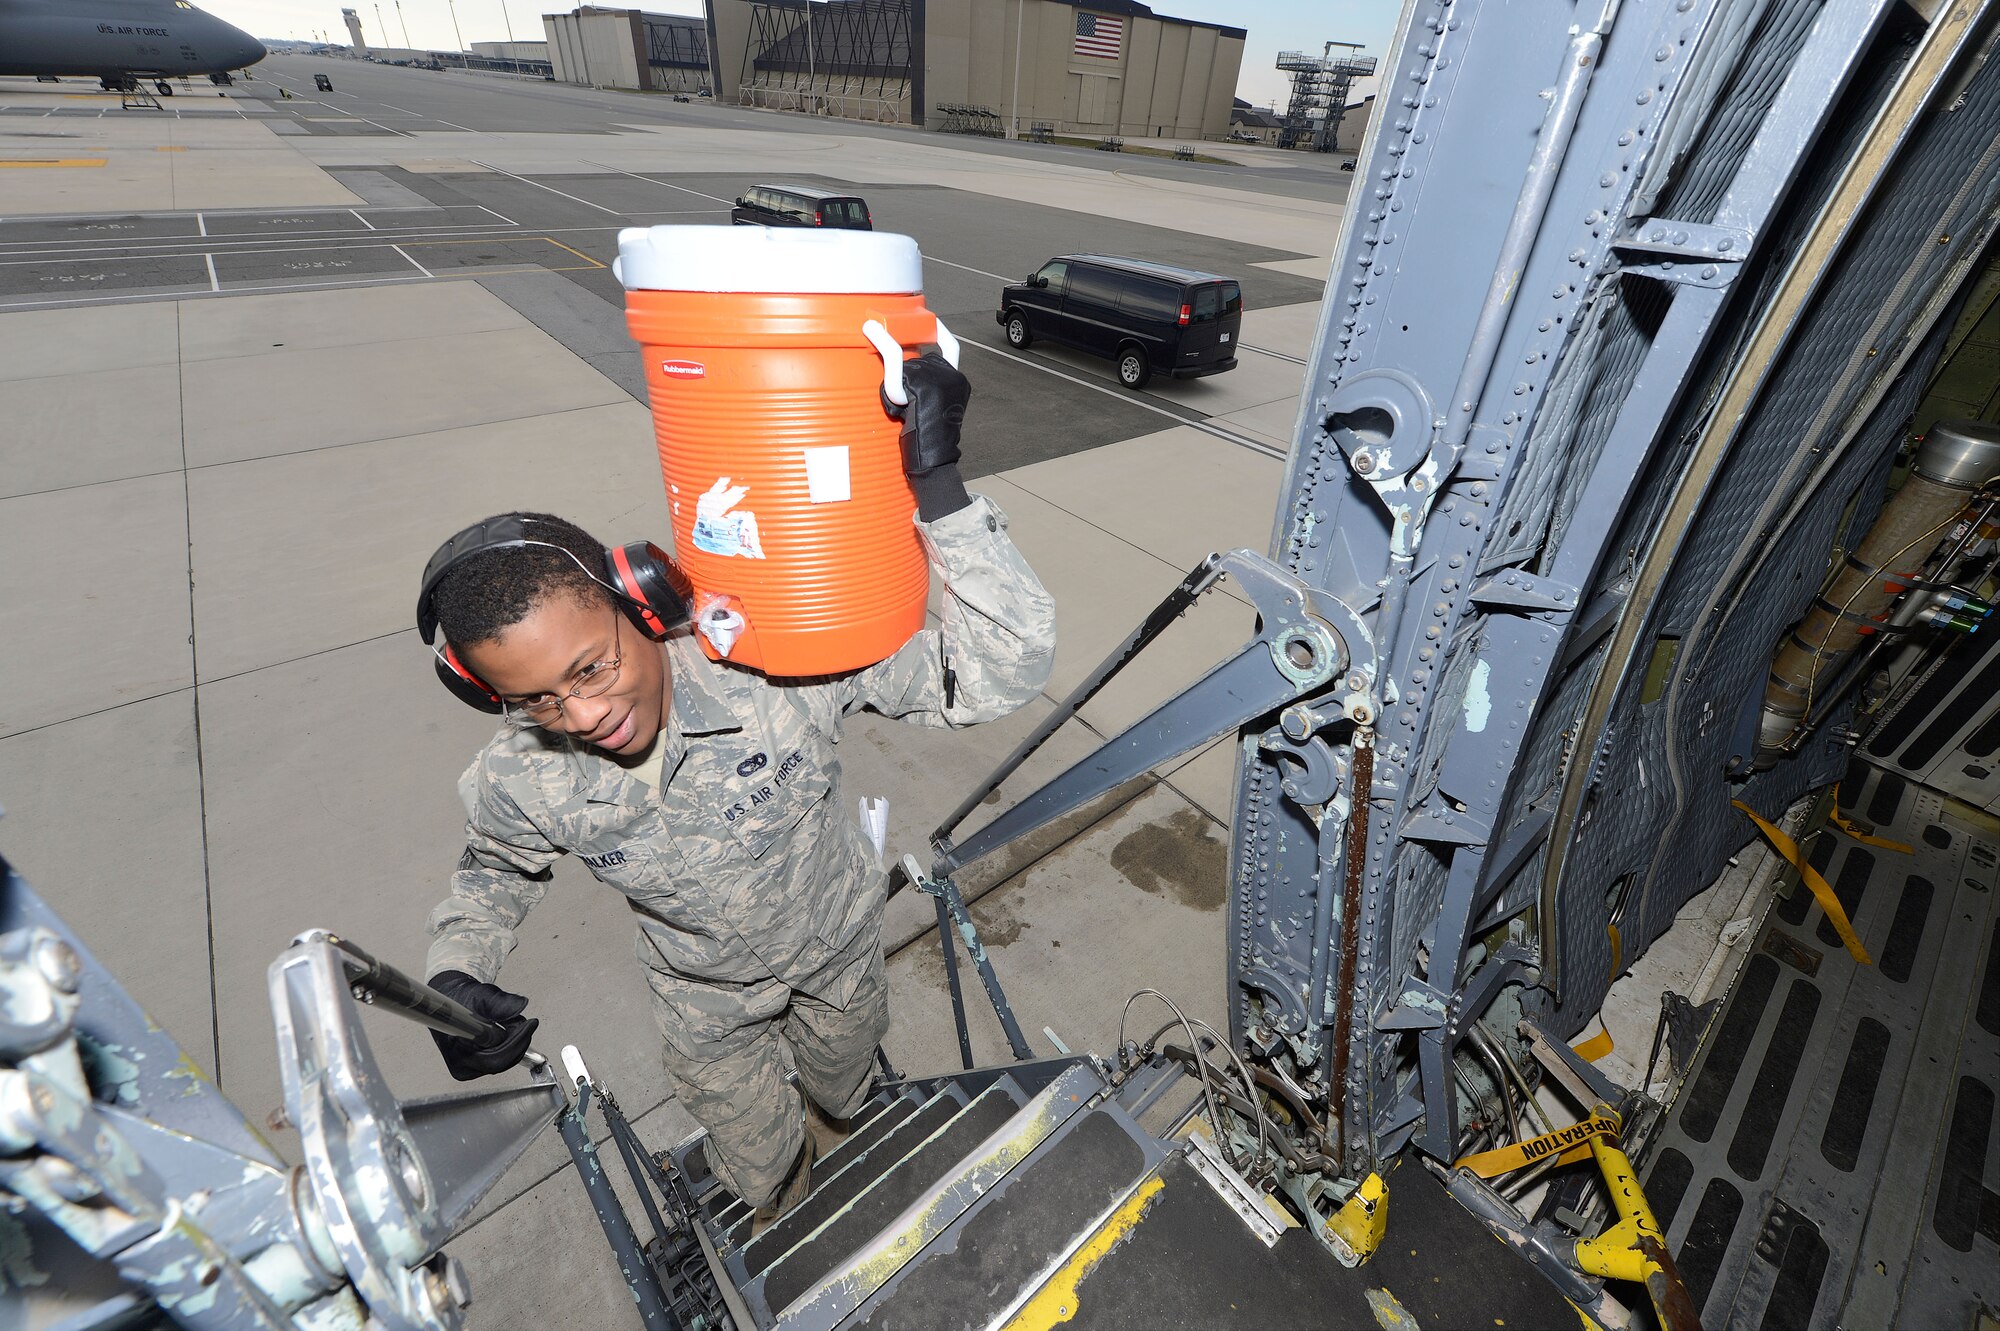 Airman 1st Class Brandon Walker carries a insulated water container up the main crew entry ladder of a C-5M Super Galaxy from the 436th Airlift Wing, Dover Air Force Base, Del., March 28, 2013, as the aircraft is prepared for a flight overseas. The 436th Aerial Port Squadron, clean fleet services section, provides comfort items such as potable water, pillows and blankets and other items needed by aircrew and passengers. (U.S. Air Force photo/Greg L. Davis)